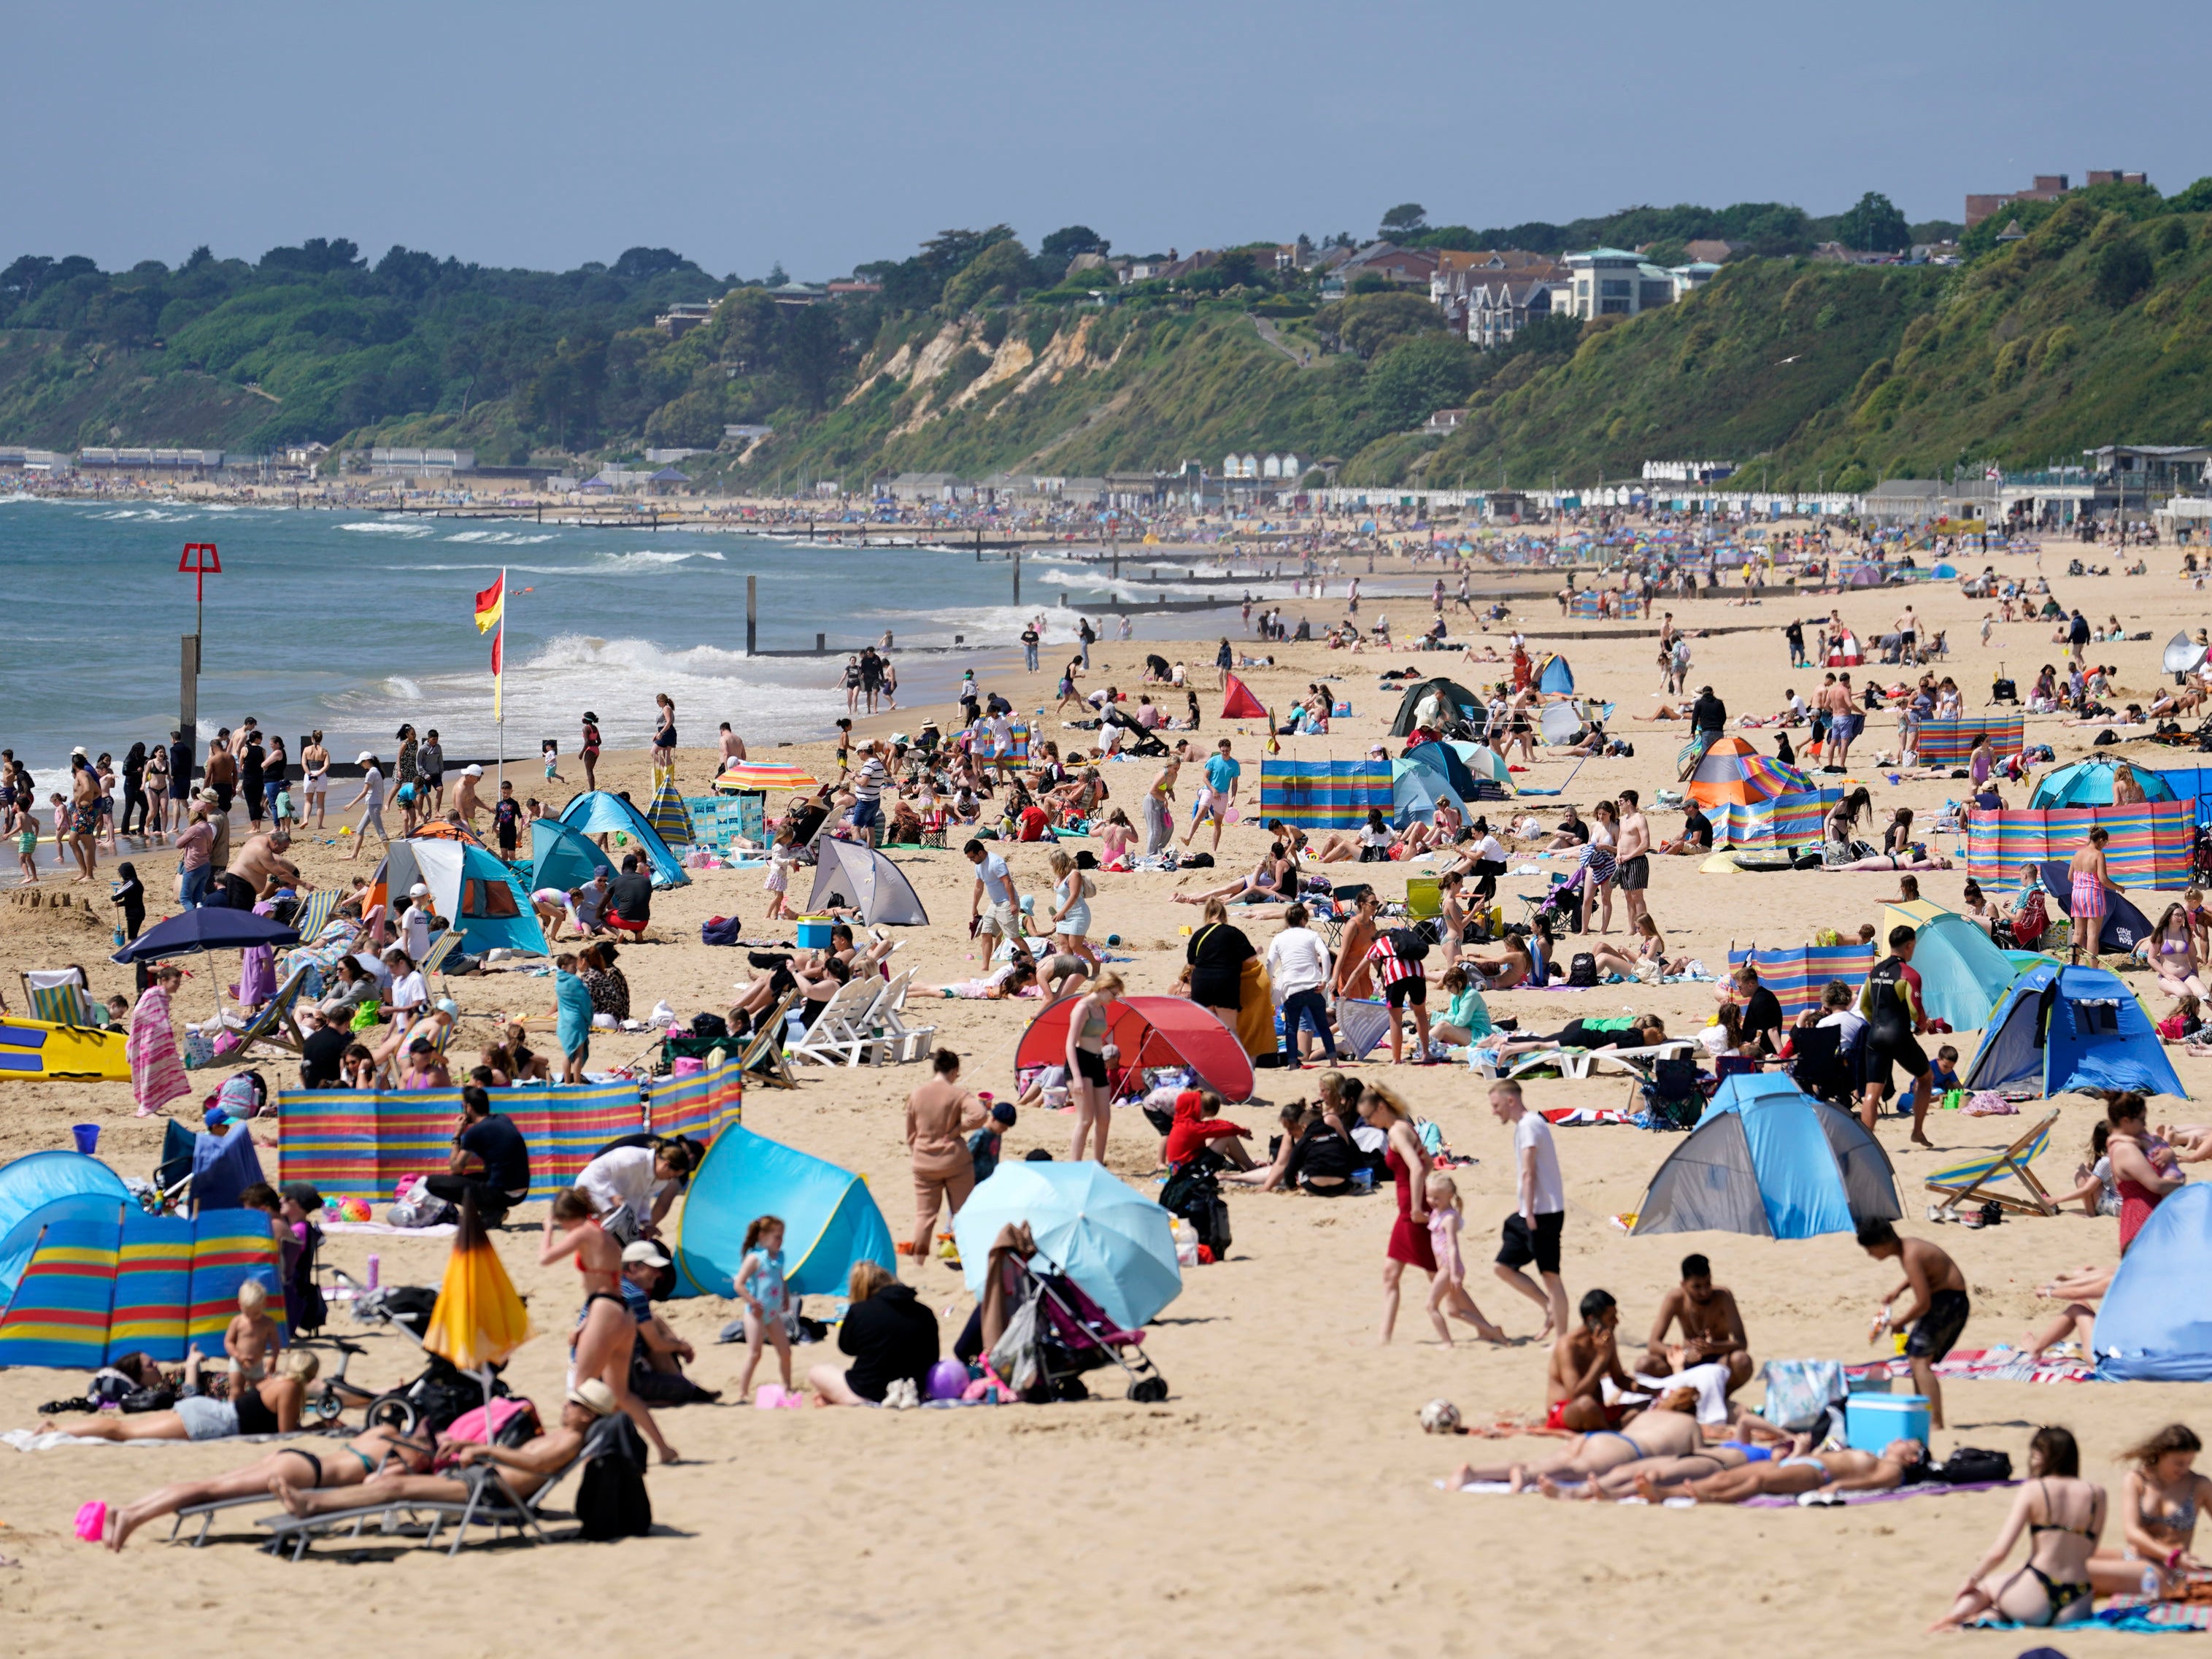 Bournemouth beach was busy again on Thursday